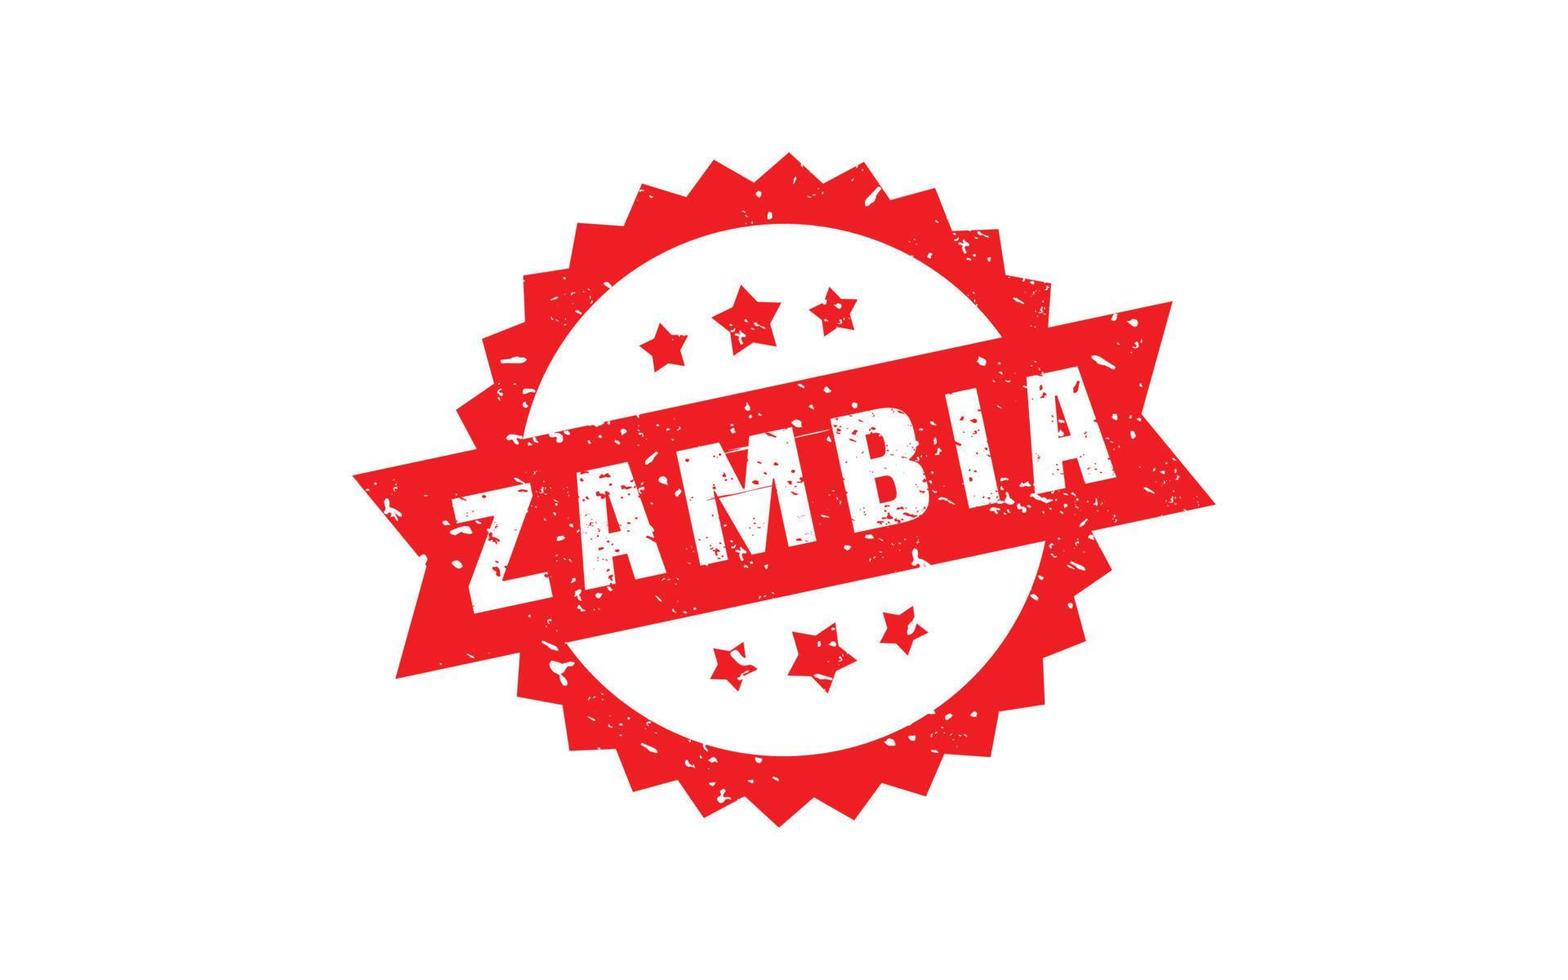 ZAMBIA stamp rubber with grunge style on white background vector